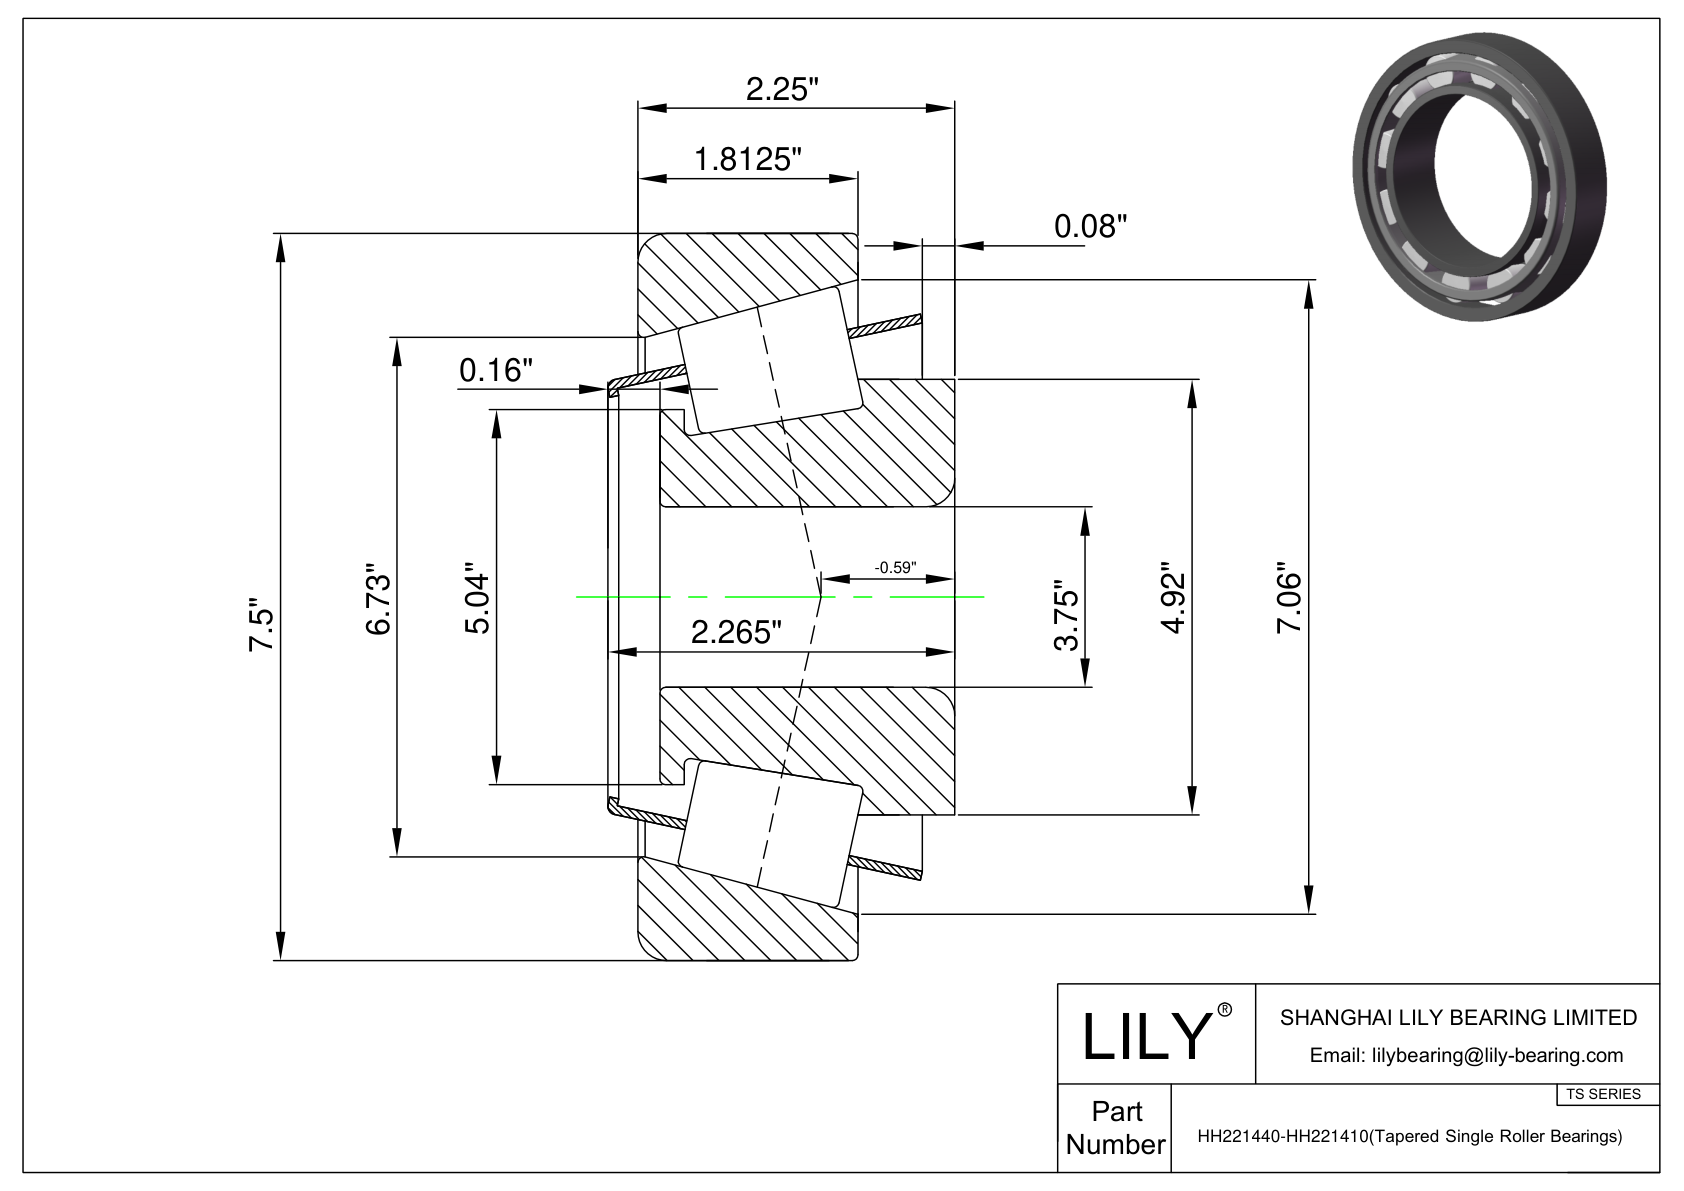 HH221440-HH221410 TS (Tapered Single Roller Bearings) (Imperial) cad drawing